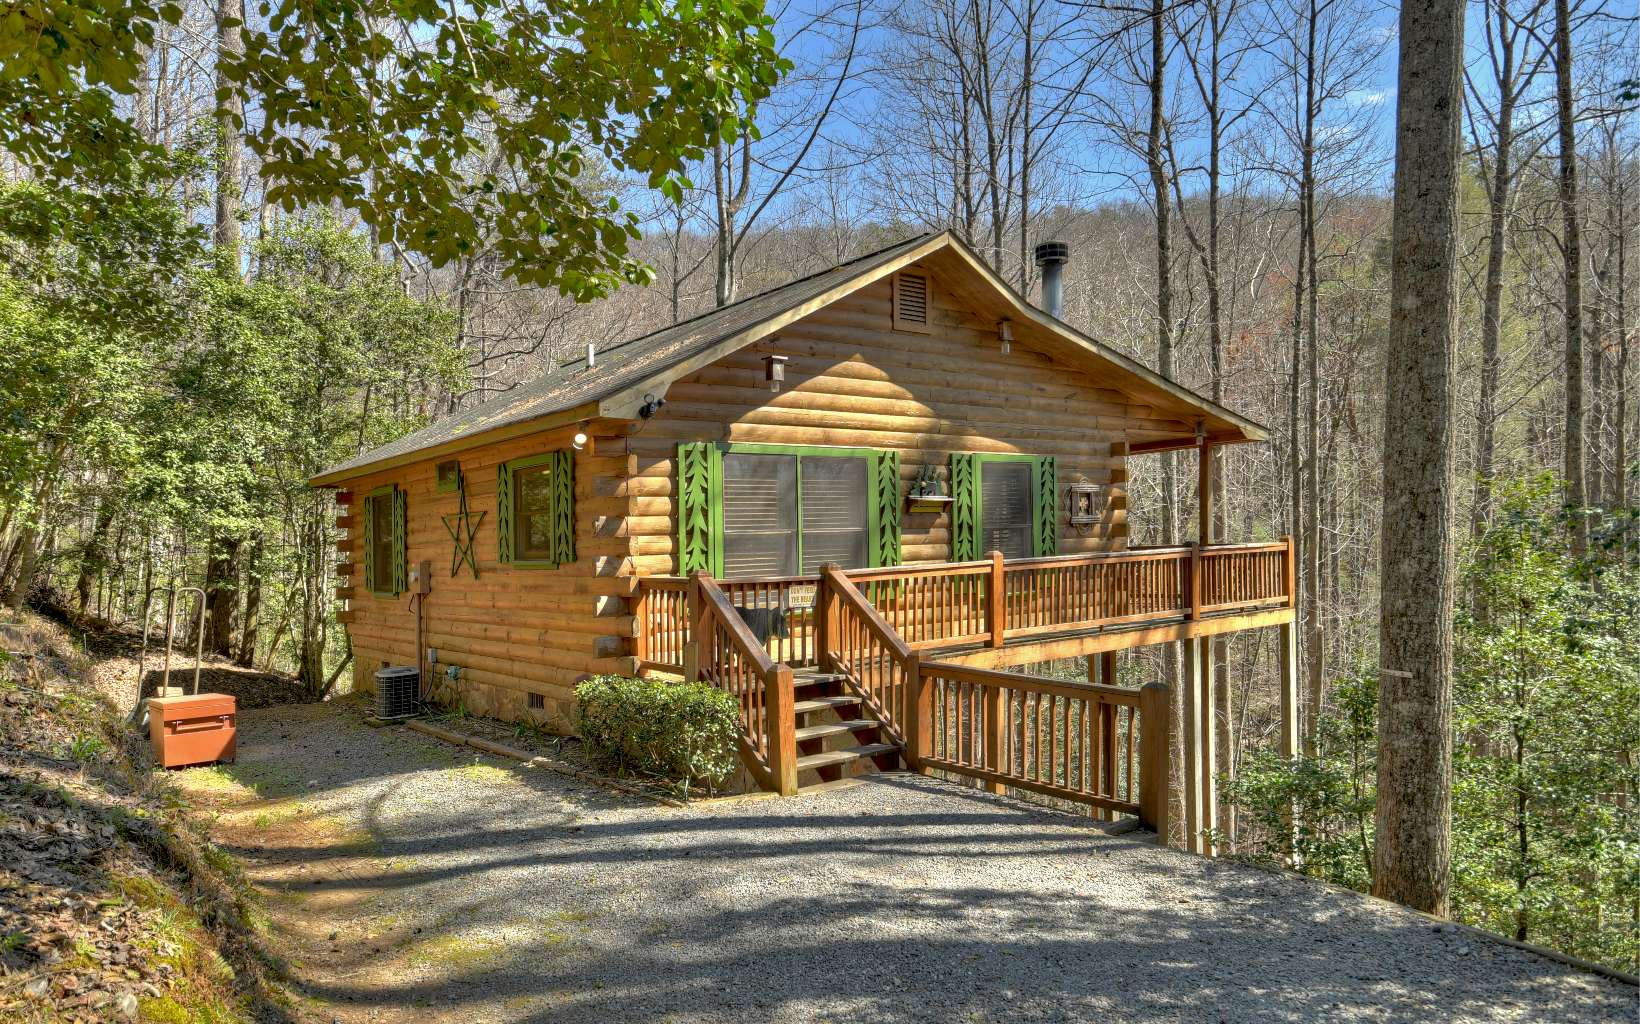 Looking for the cutest cabin in the North Georgia Mountains? Charming from the time you pull in the driveway ! All paved roads lead you to this fully turnkey rental cabin with established rental history. Cabin features all the amenities you need for a peaceful mountain getaway. Rest your body after a long hike in the hot tub , then enjoy a great meal cooked on the upscale grill mounted on the deck. Minutes to the Benton Mckaye trails, multiple wineries and the historic towns of Blue Ridge and Ellijay.